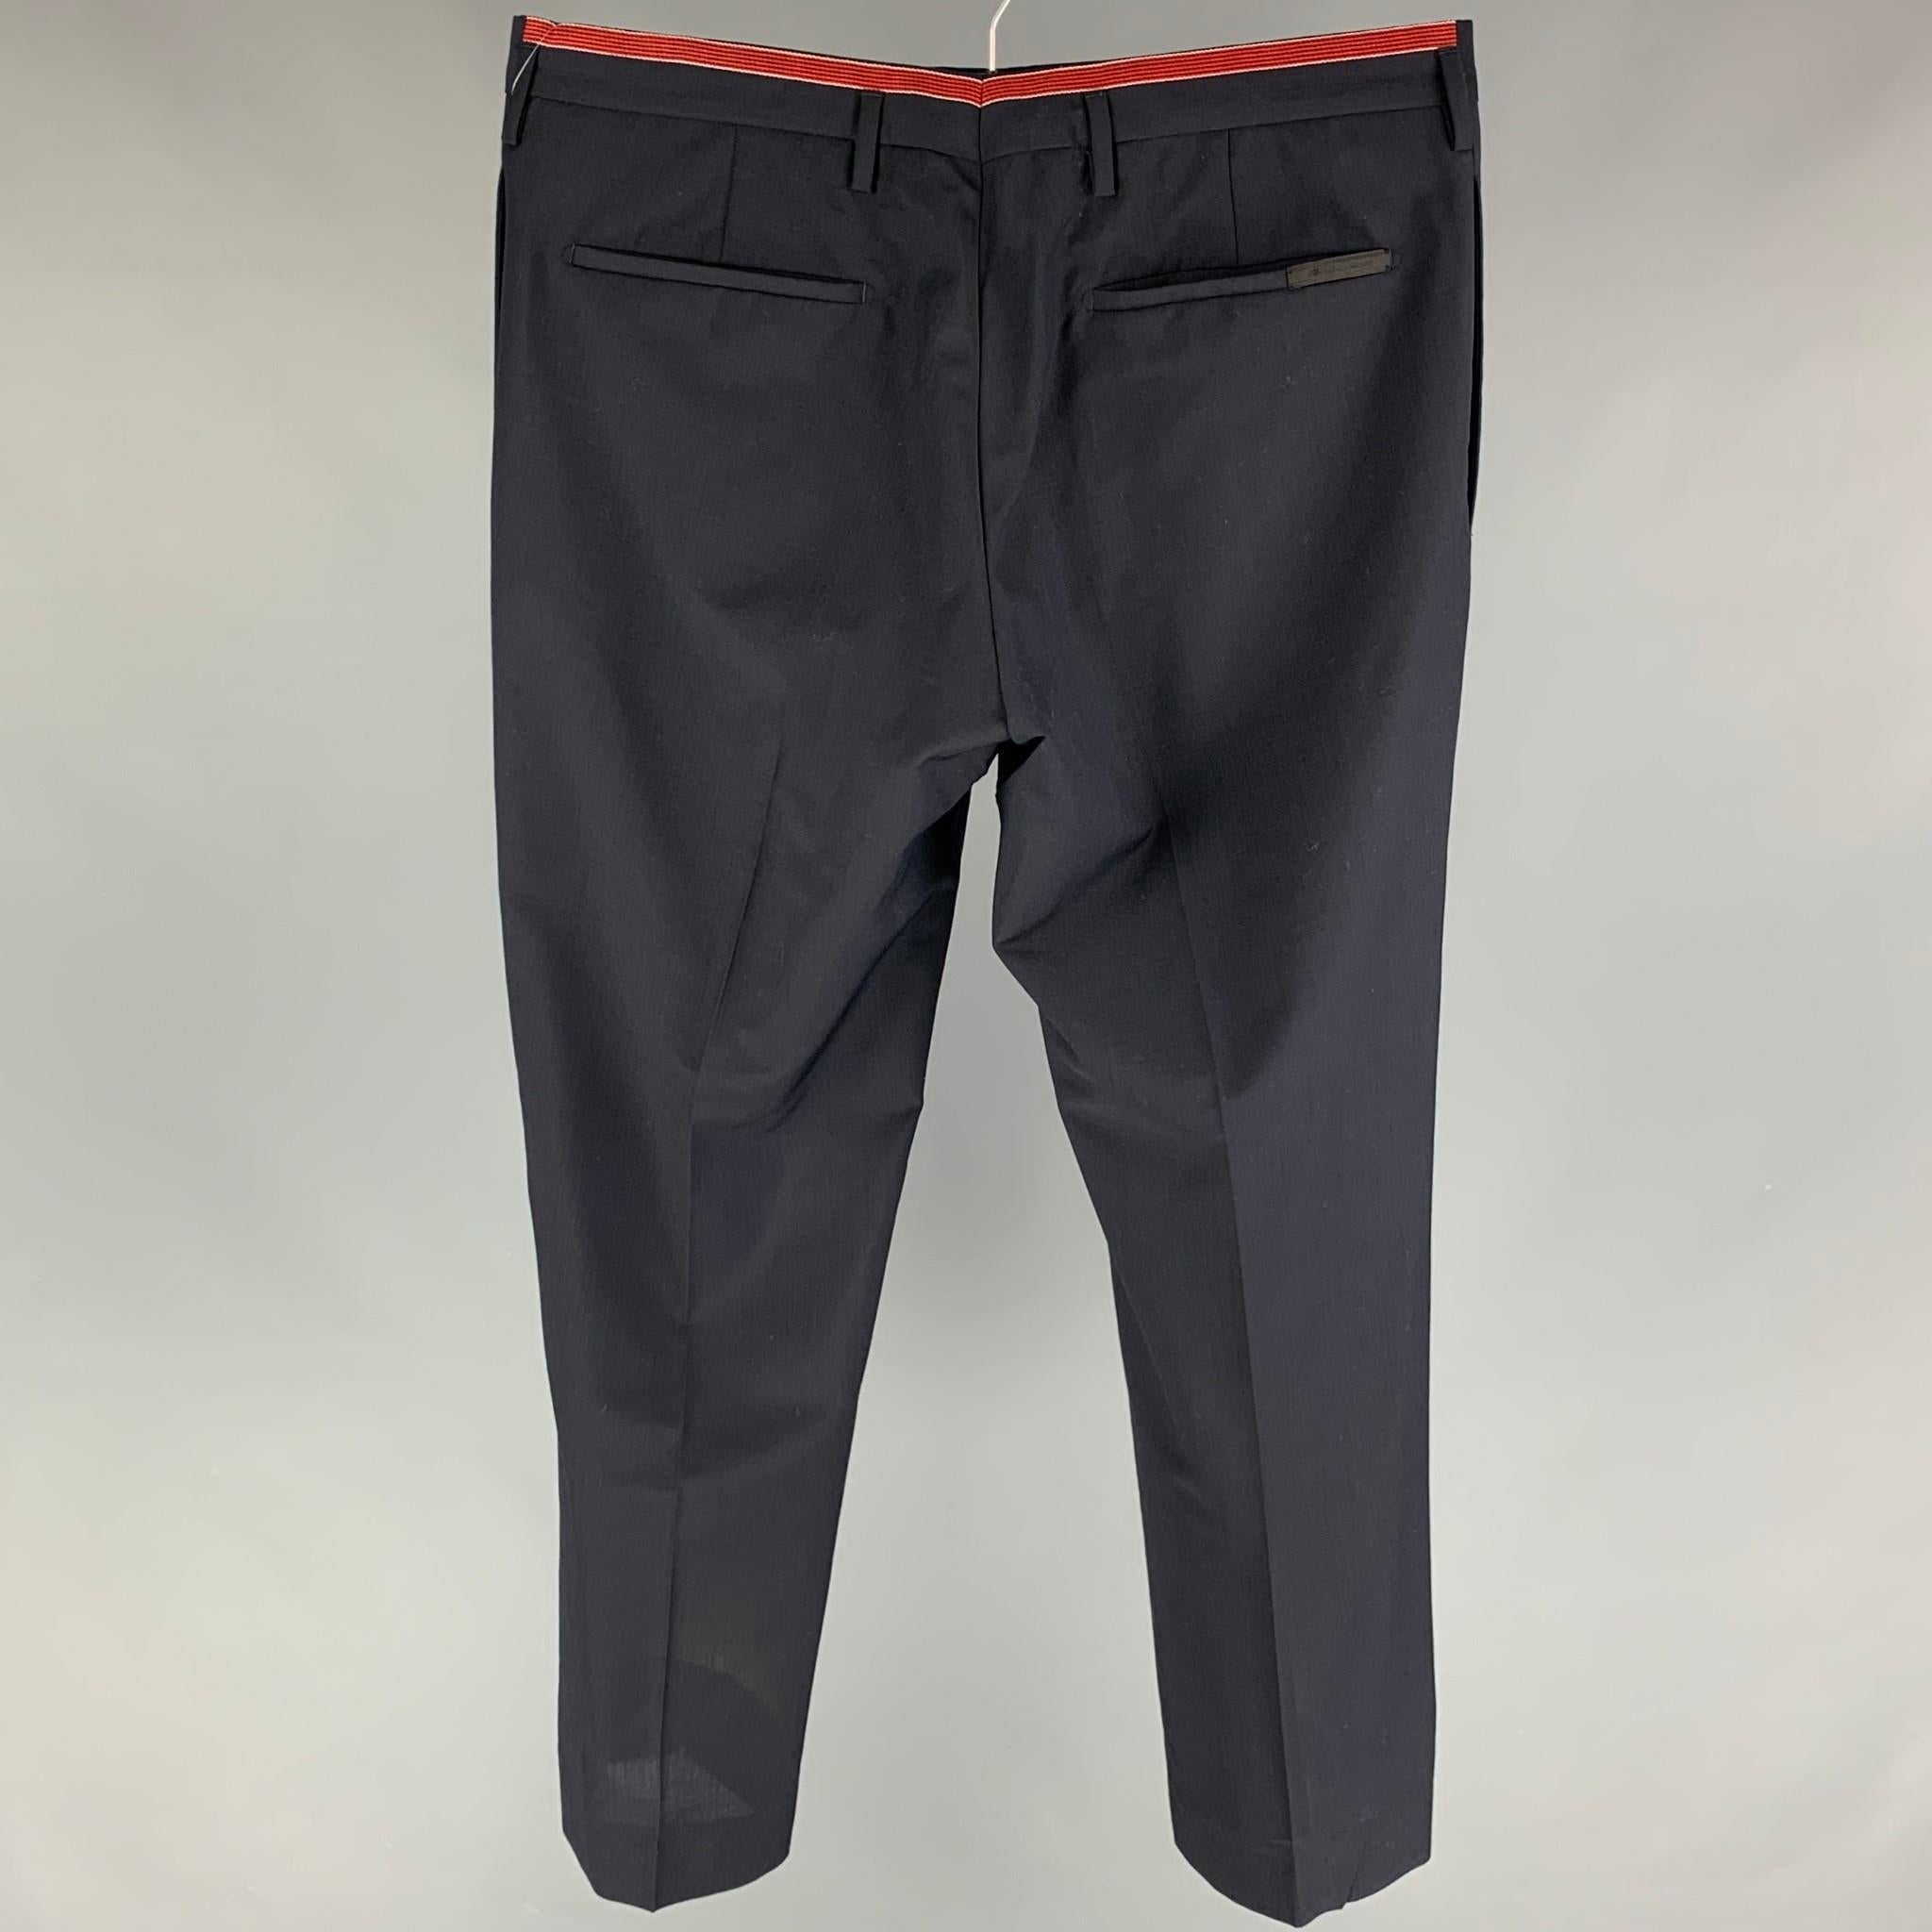 PRADA dress pants comes in a navy virgin wool featuring a flat front, red stripe trim, front tab, and a button fly closure. Made in Italy. 

Very Good Pre-Owned Condition.
Marked: 50

Measurements:

Waist: 34 in.
Rise: 10 in.
Inseam: 28 in. 